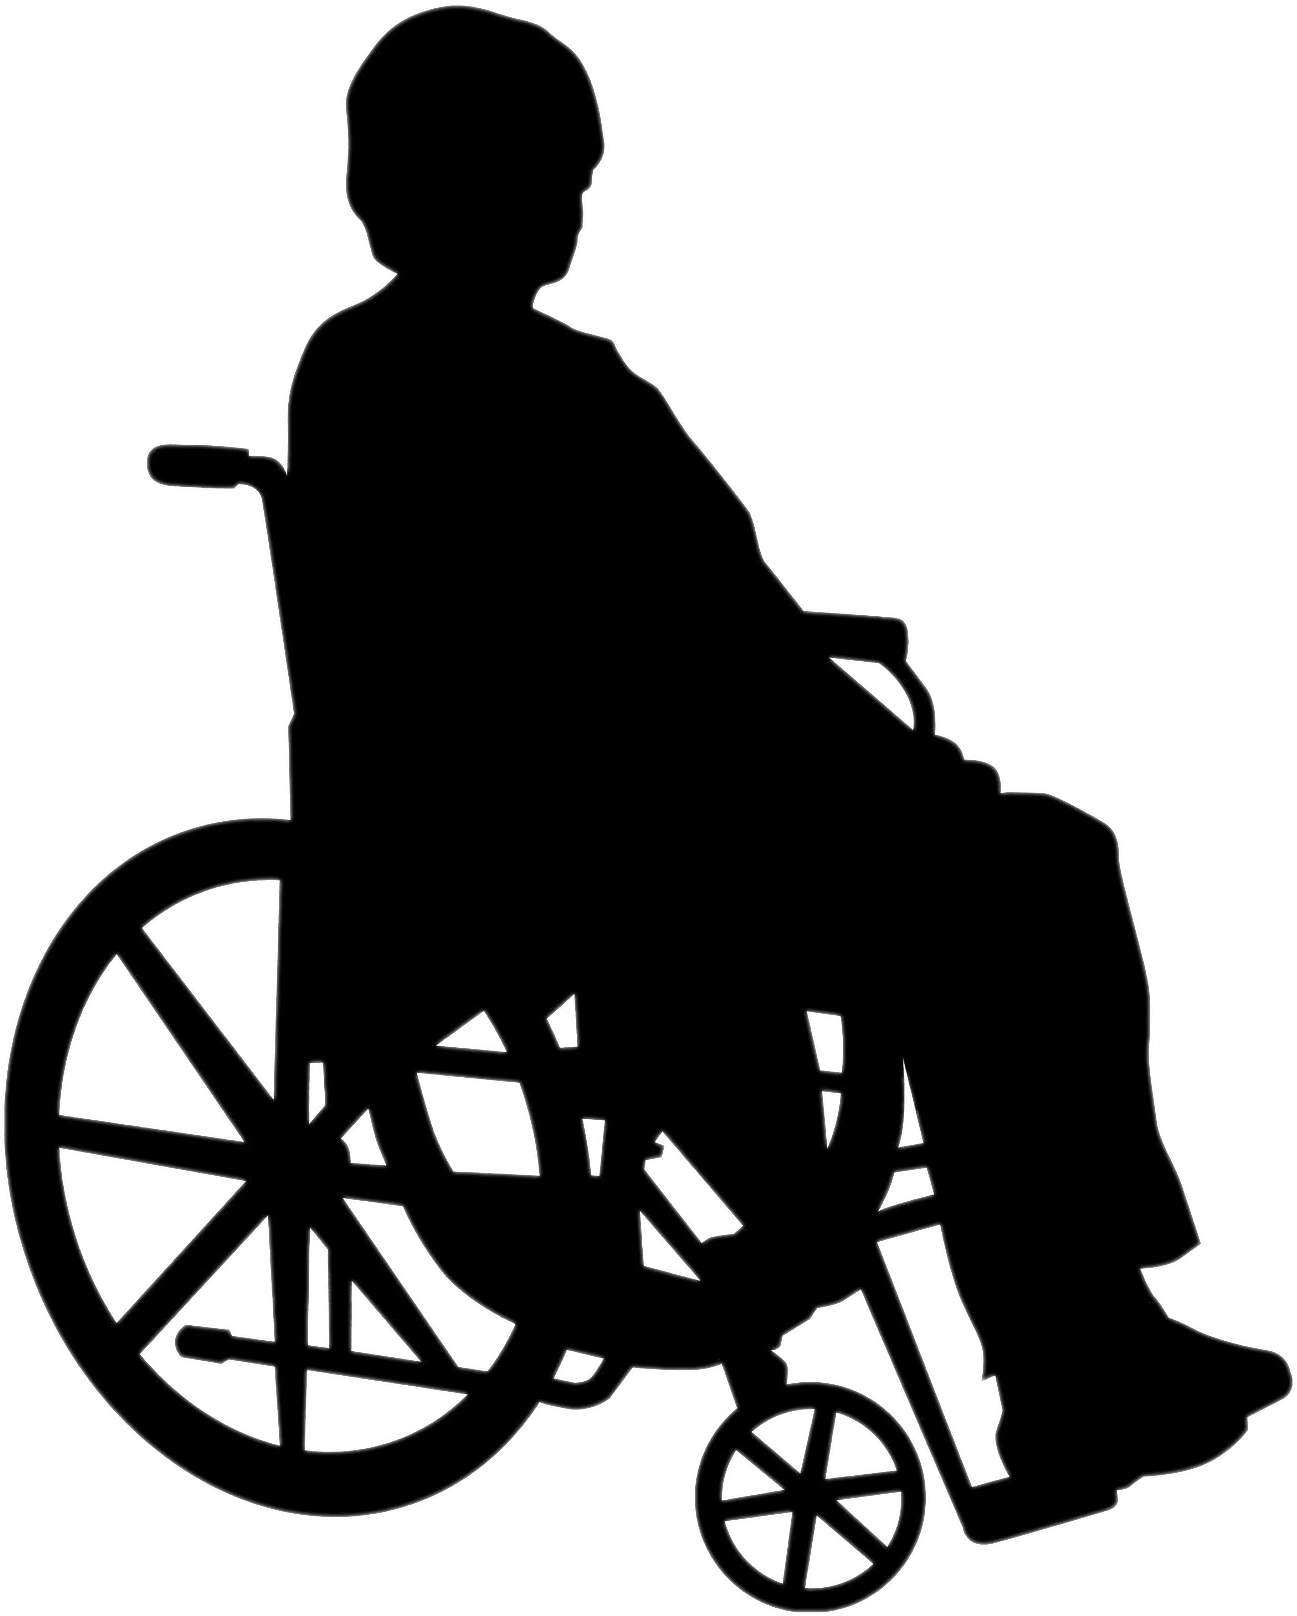 Wheelchair Silhouette Profile PNG